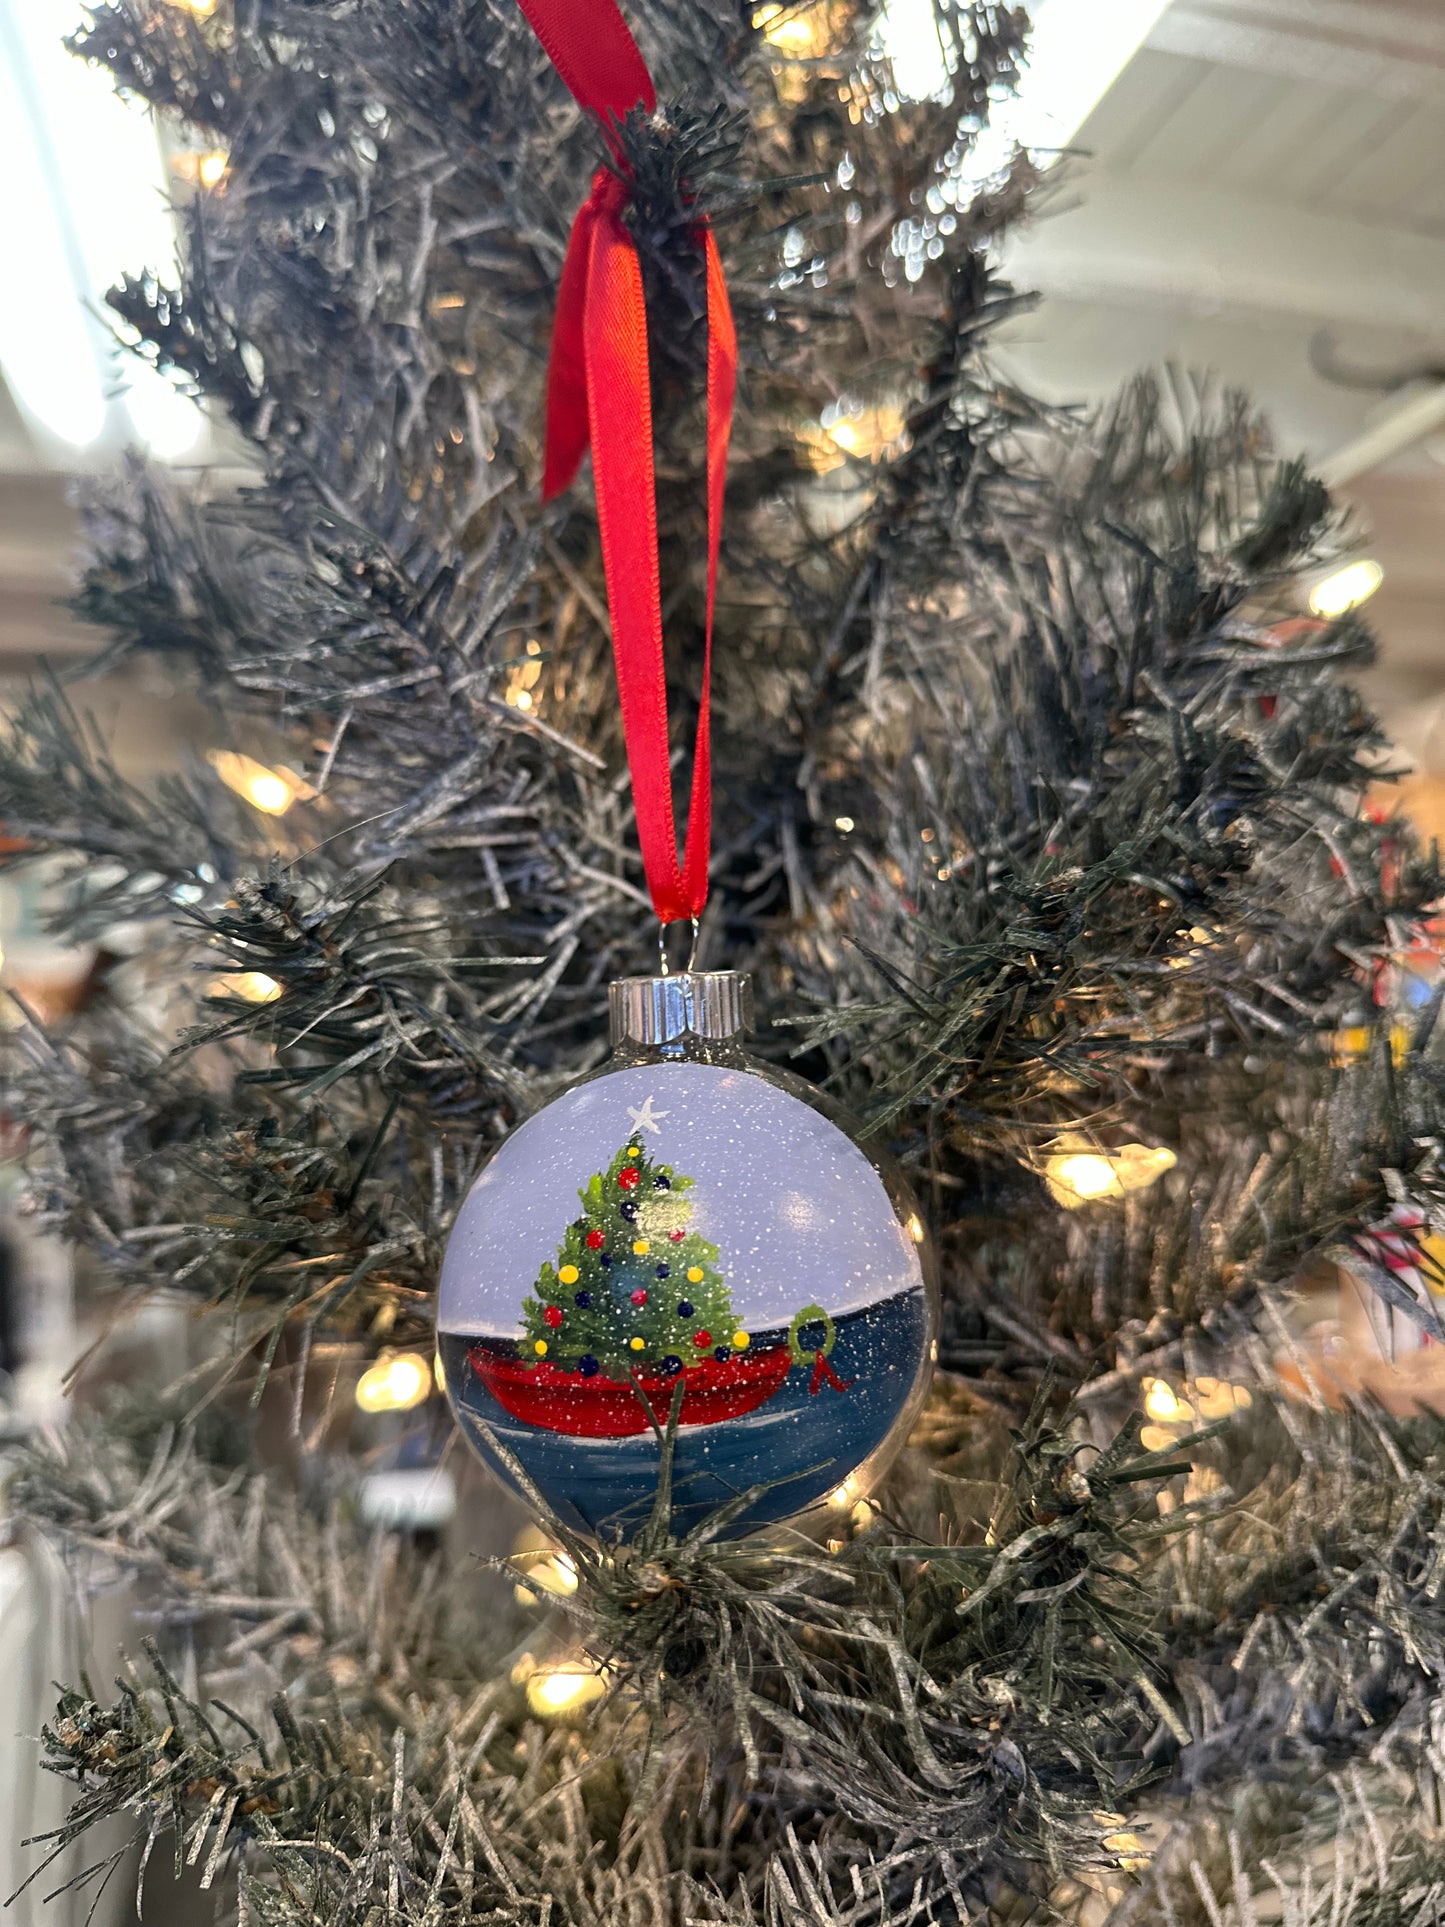 Red Dory Ornament